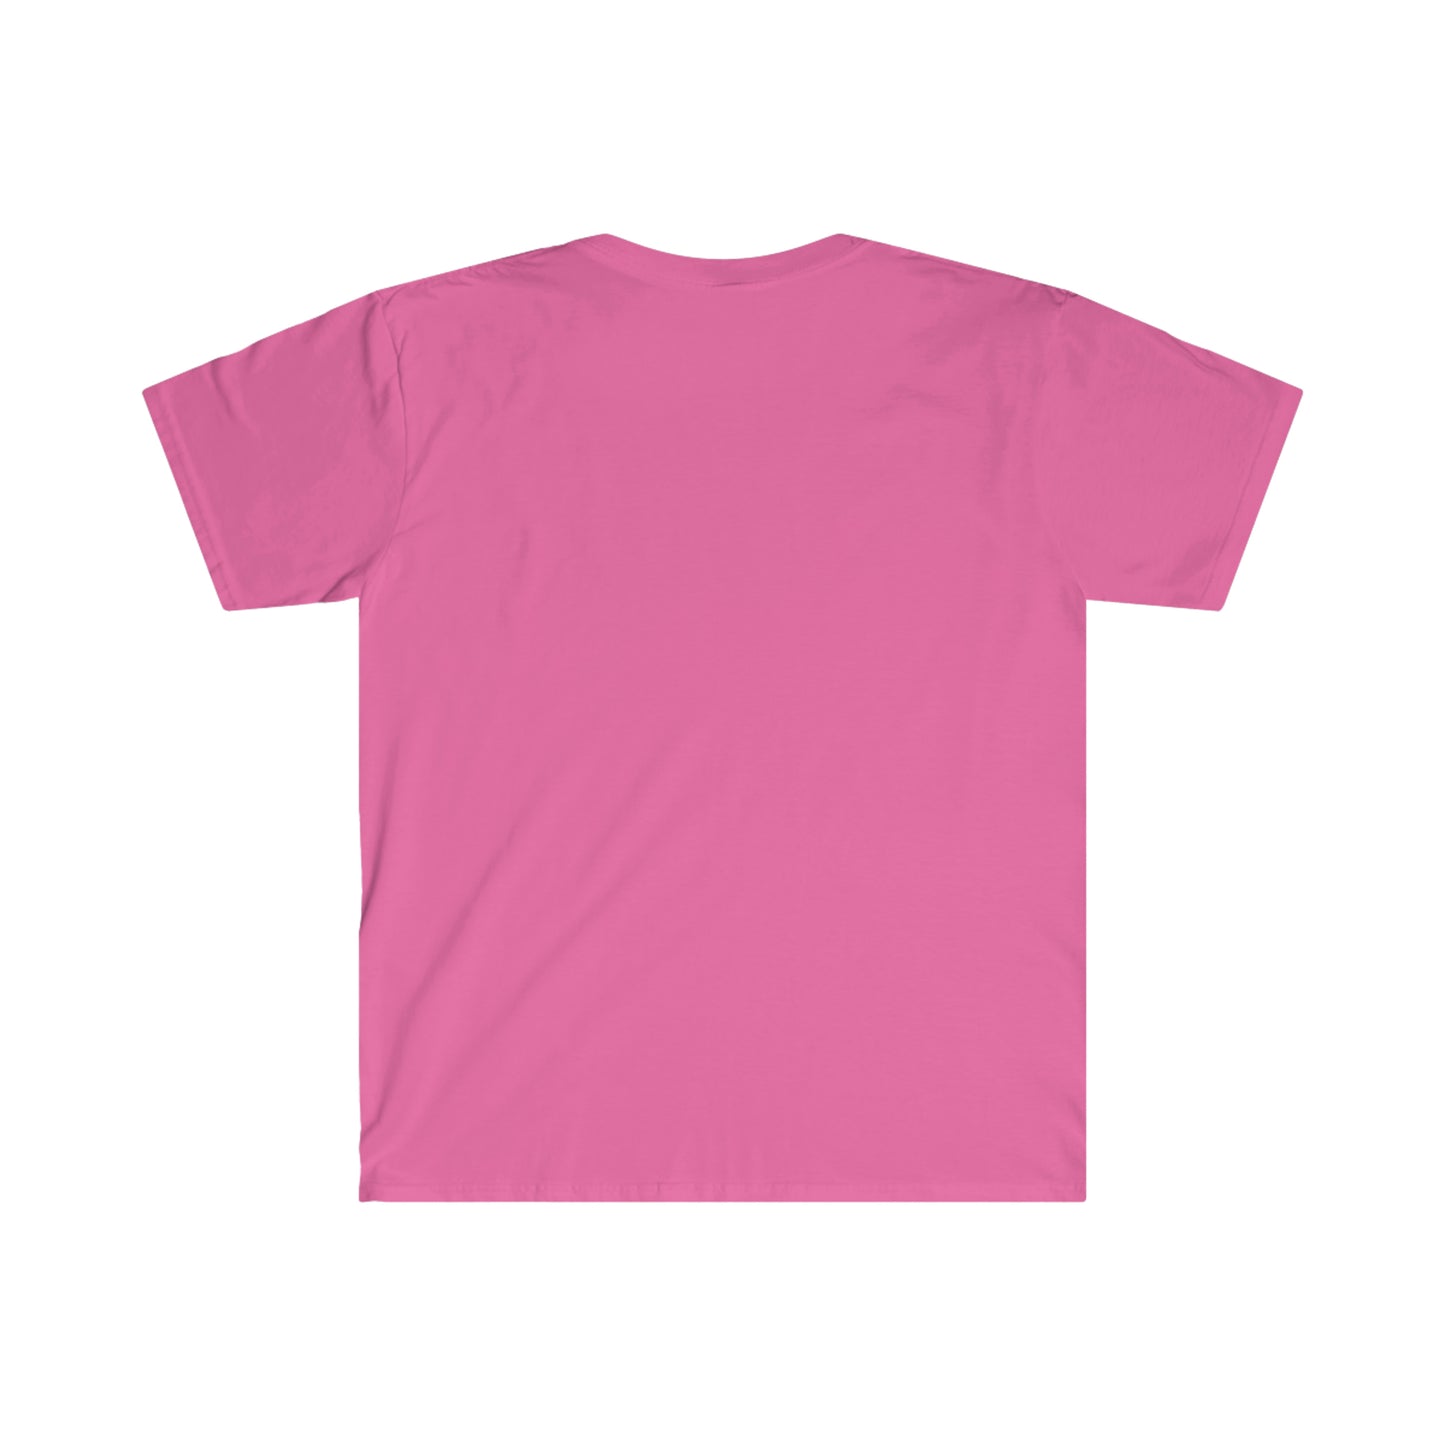 Super Mom Softstyle T-Shirt